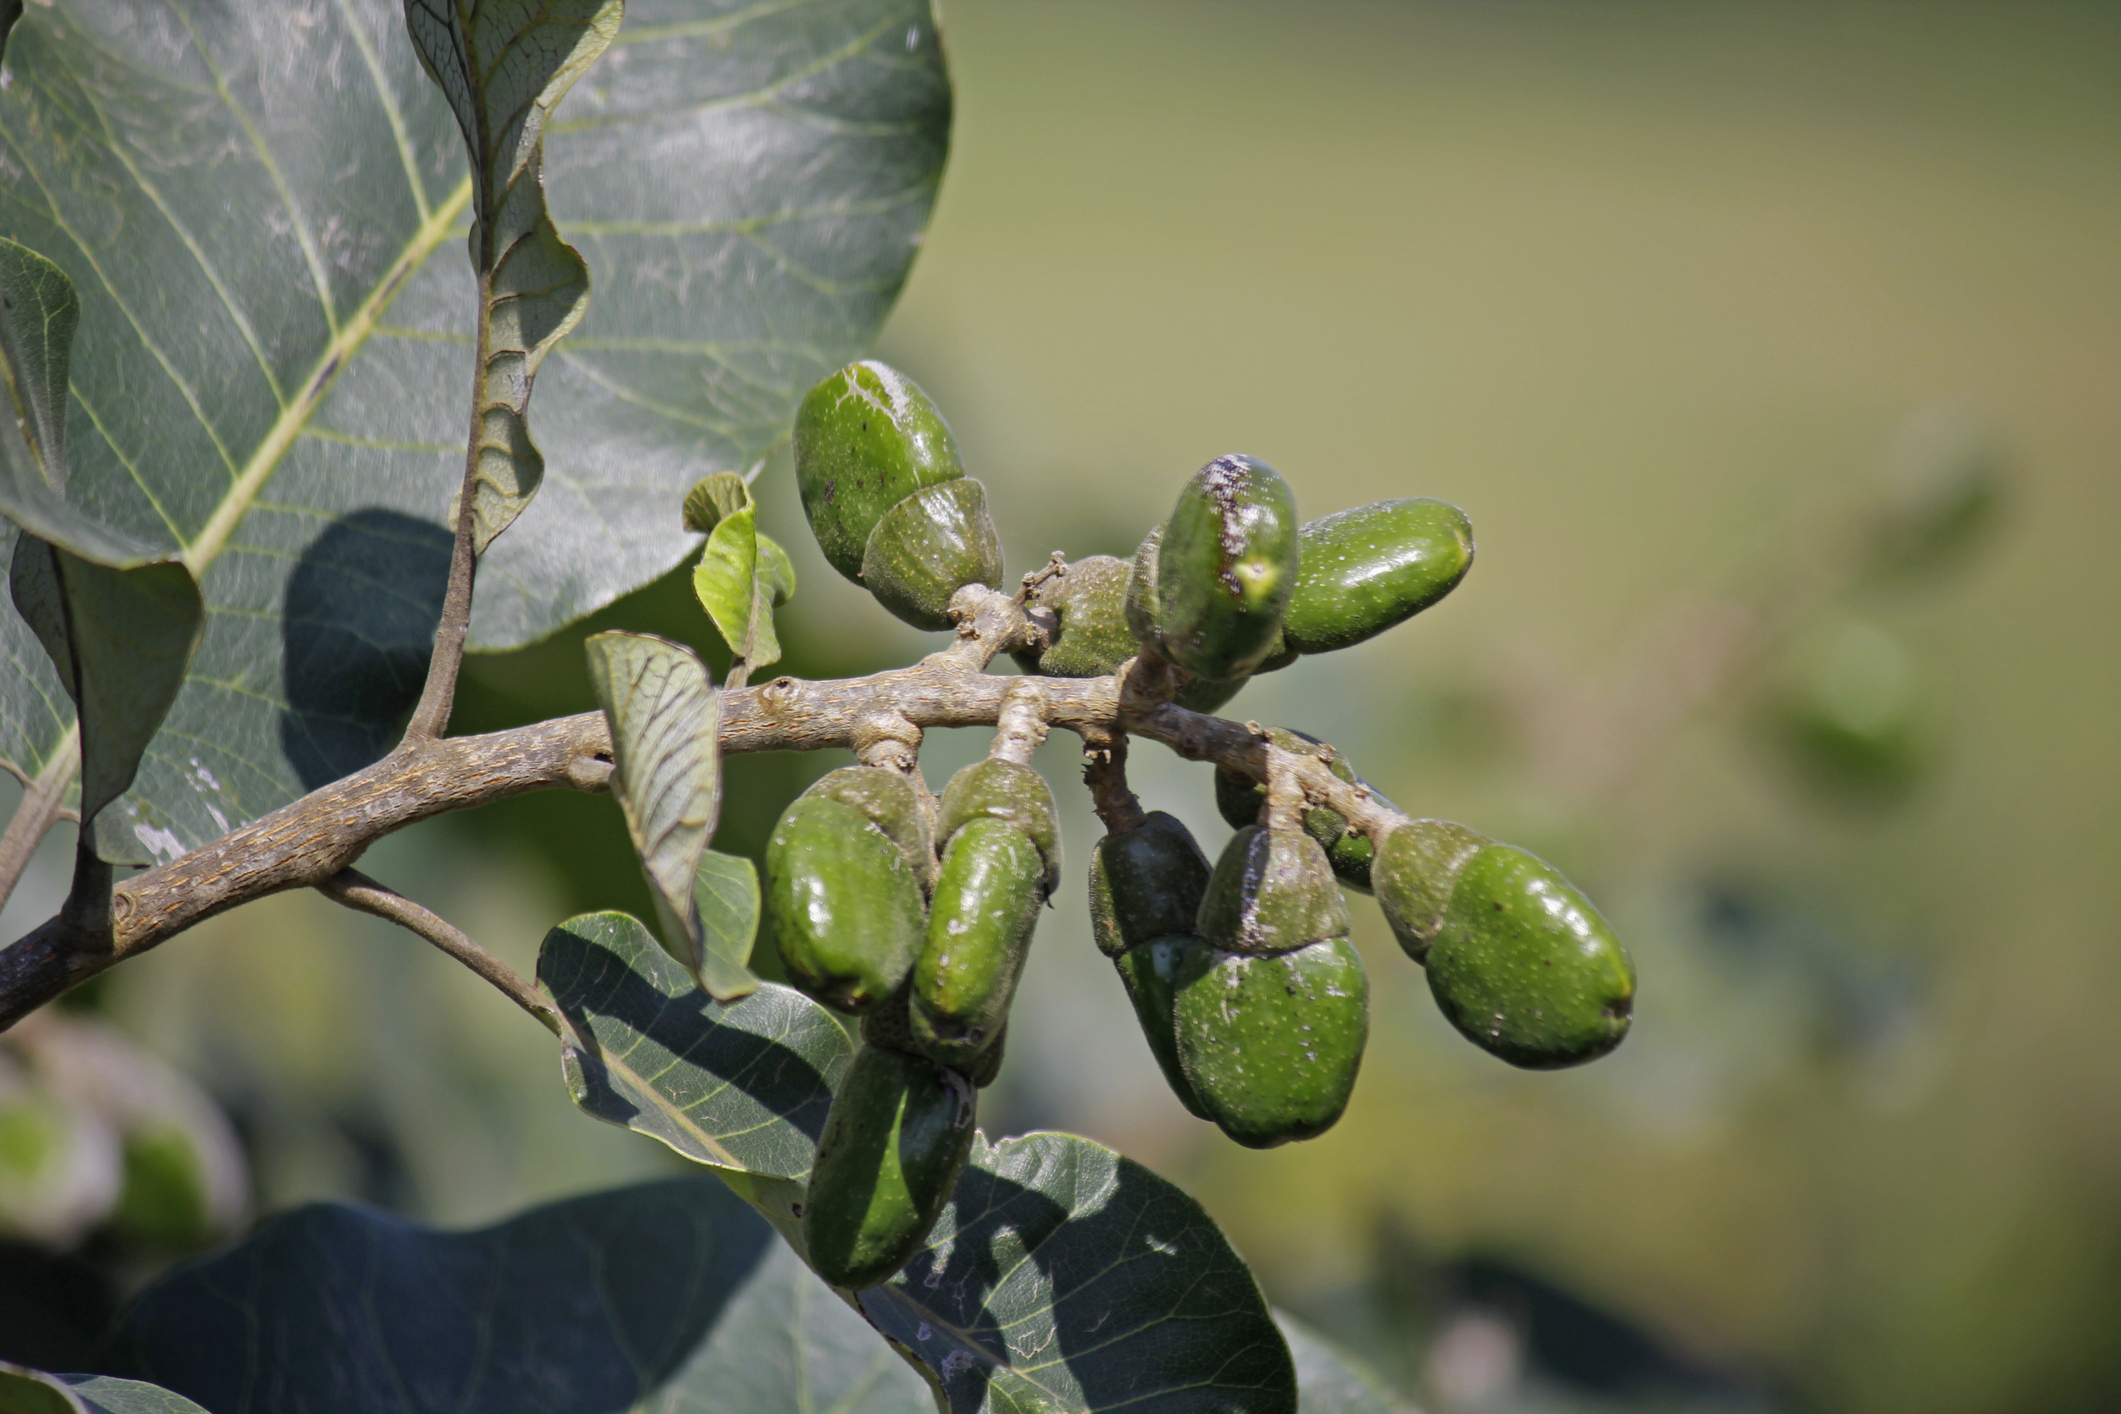 Fruits of Semecarpus anacardium. It is a deciduous tree. The nut is ovoid and smooth lustrous black. In Ayurveda, the fruit is considered a rasayana for longevity and rejuvenation.